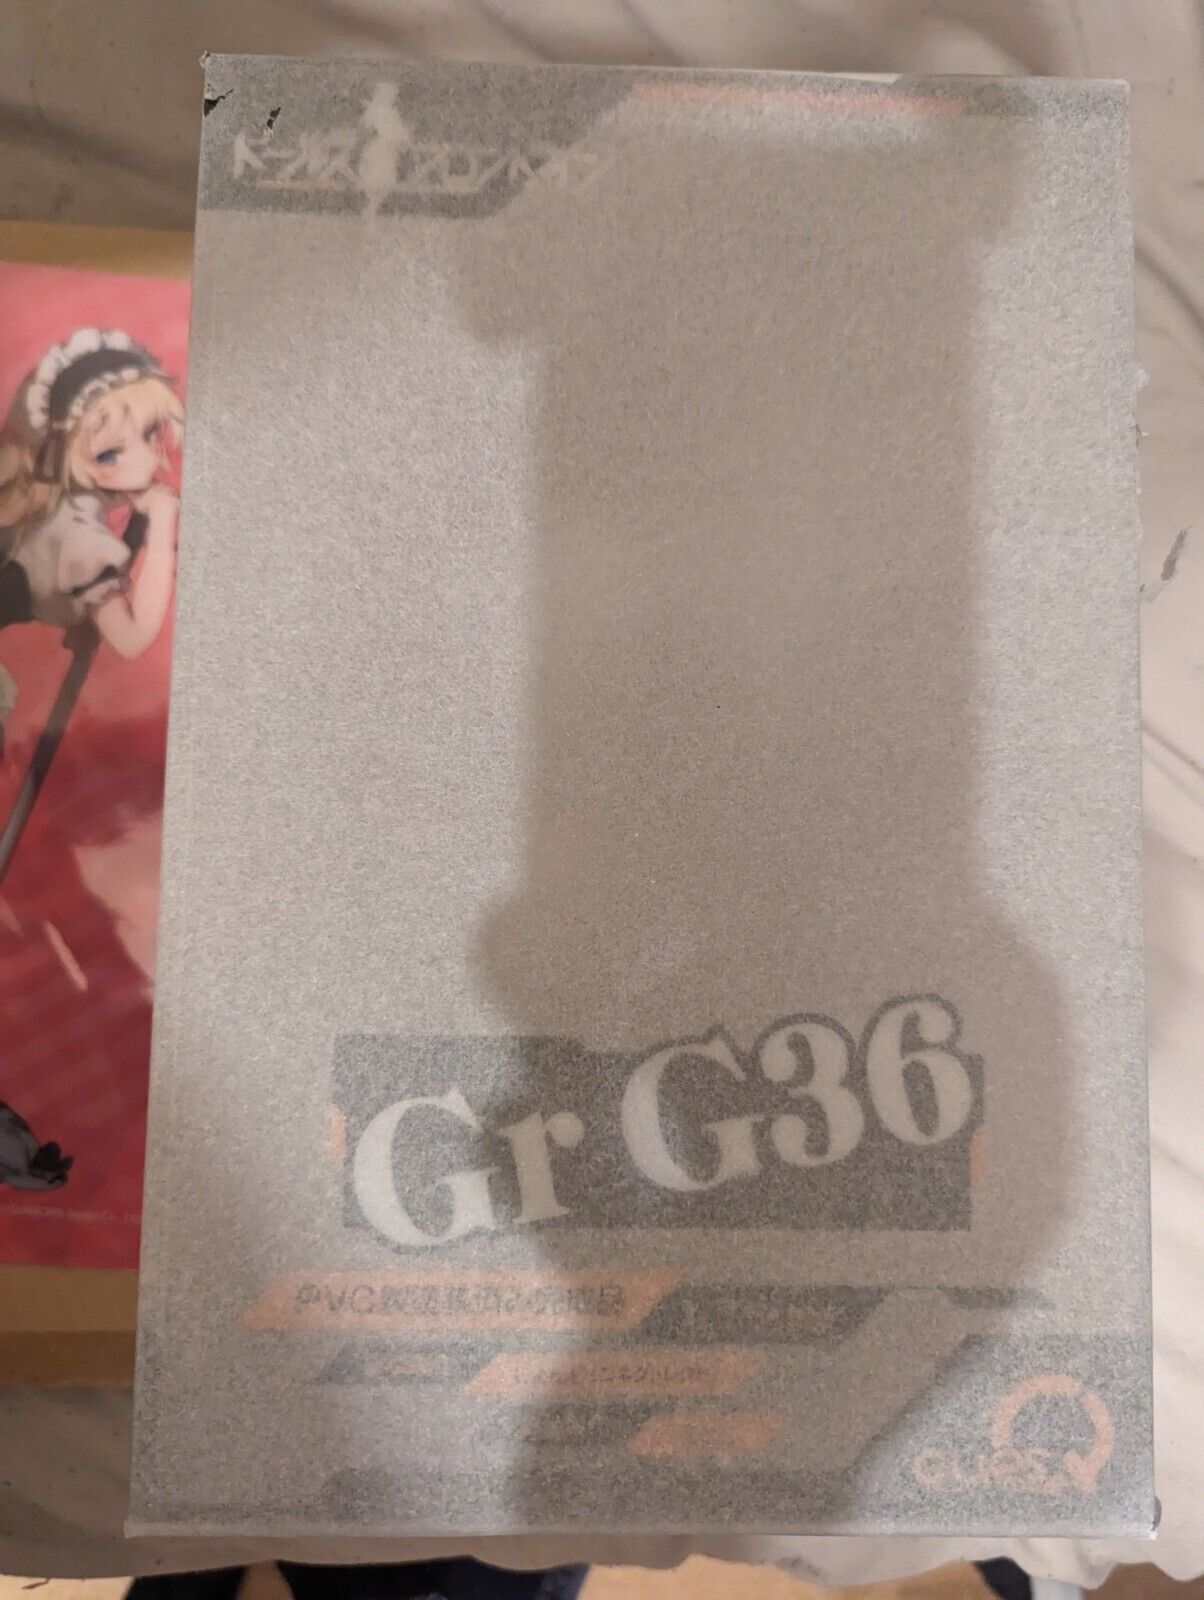 Ques Q Gr G36 - Girls' Frontline 1/7 Scale Figure New